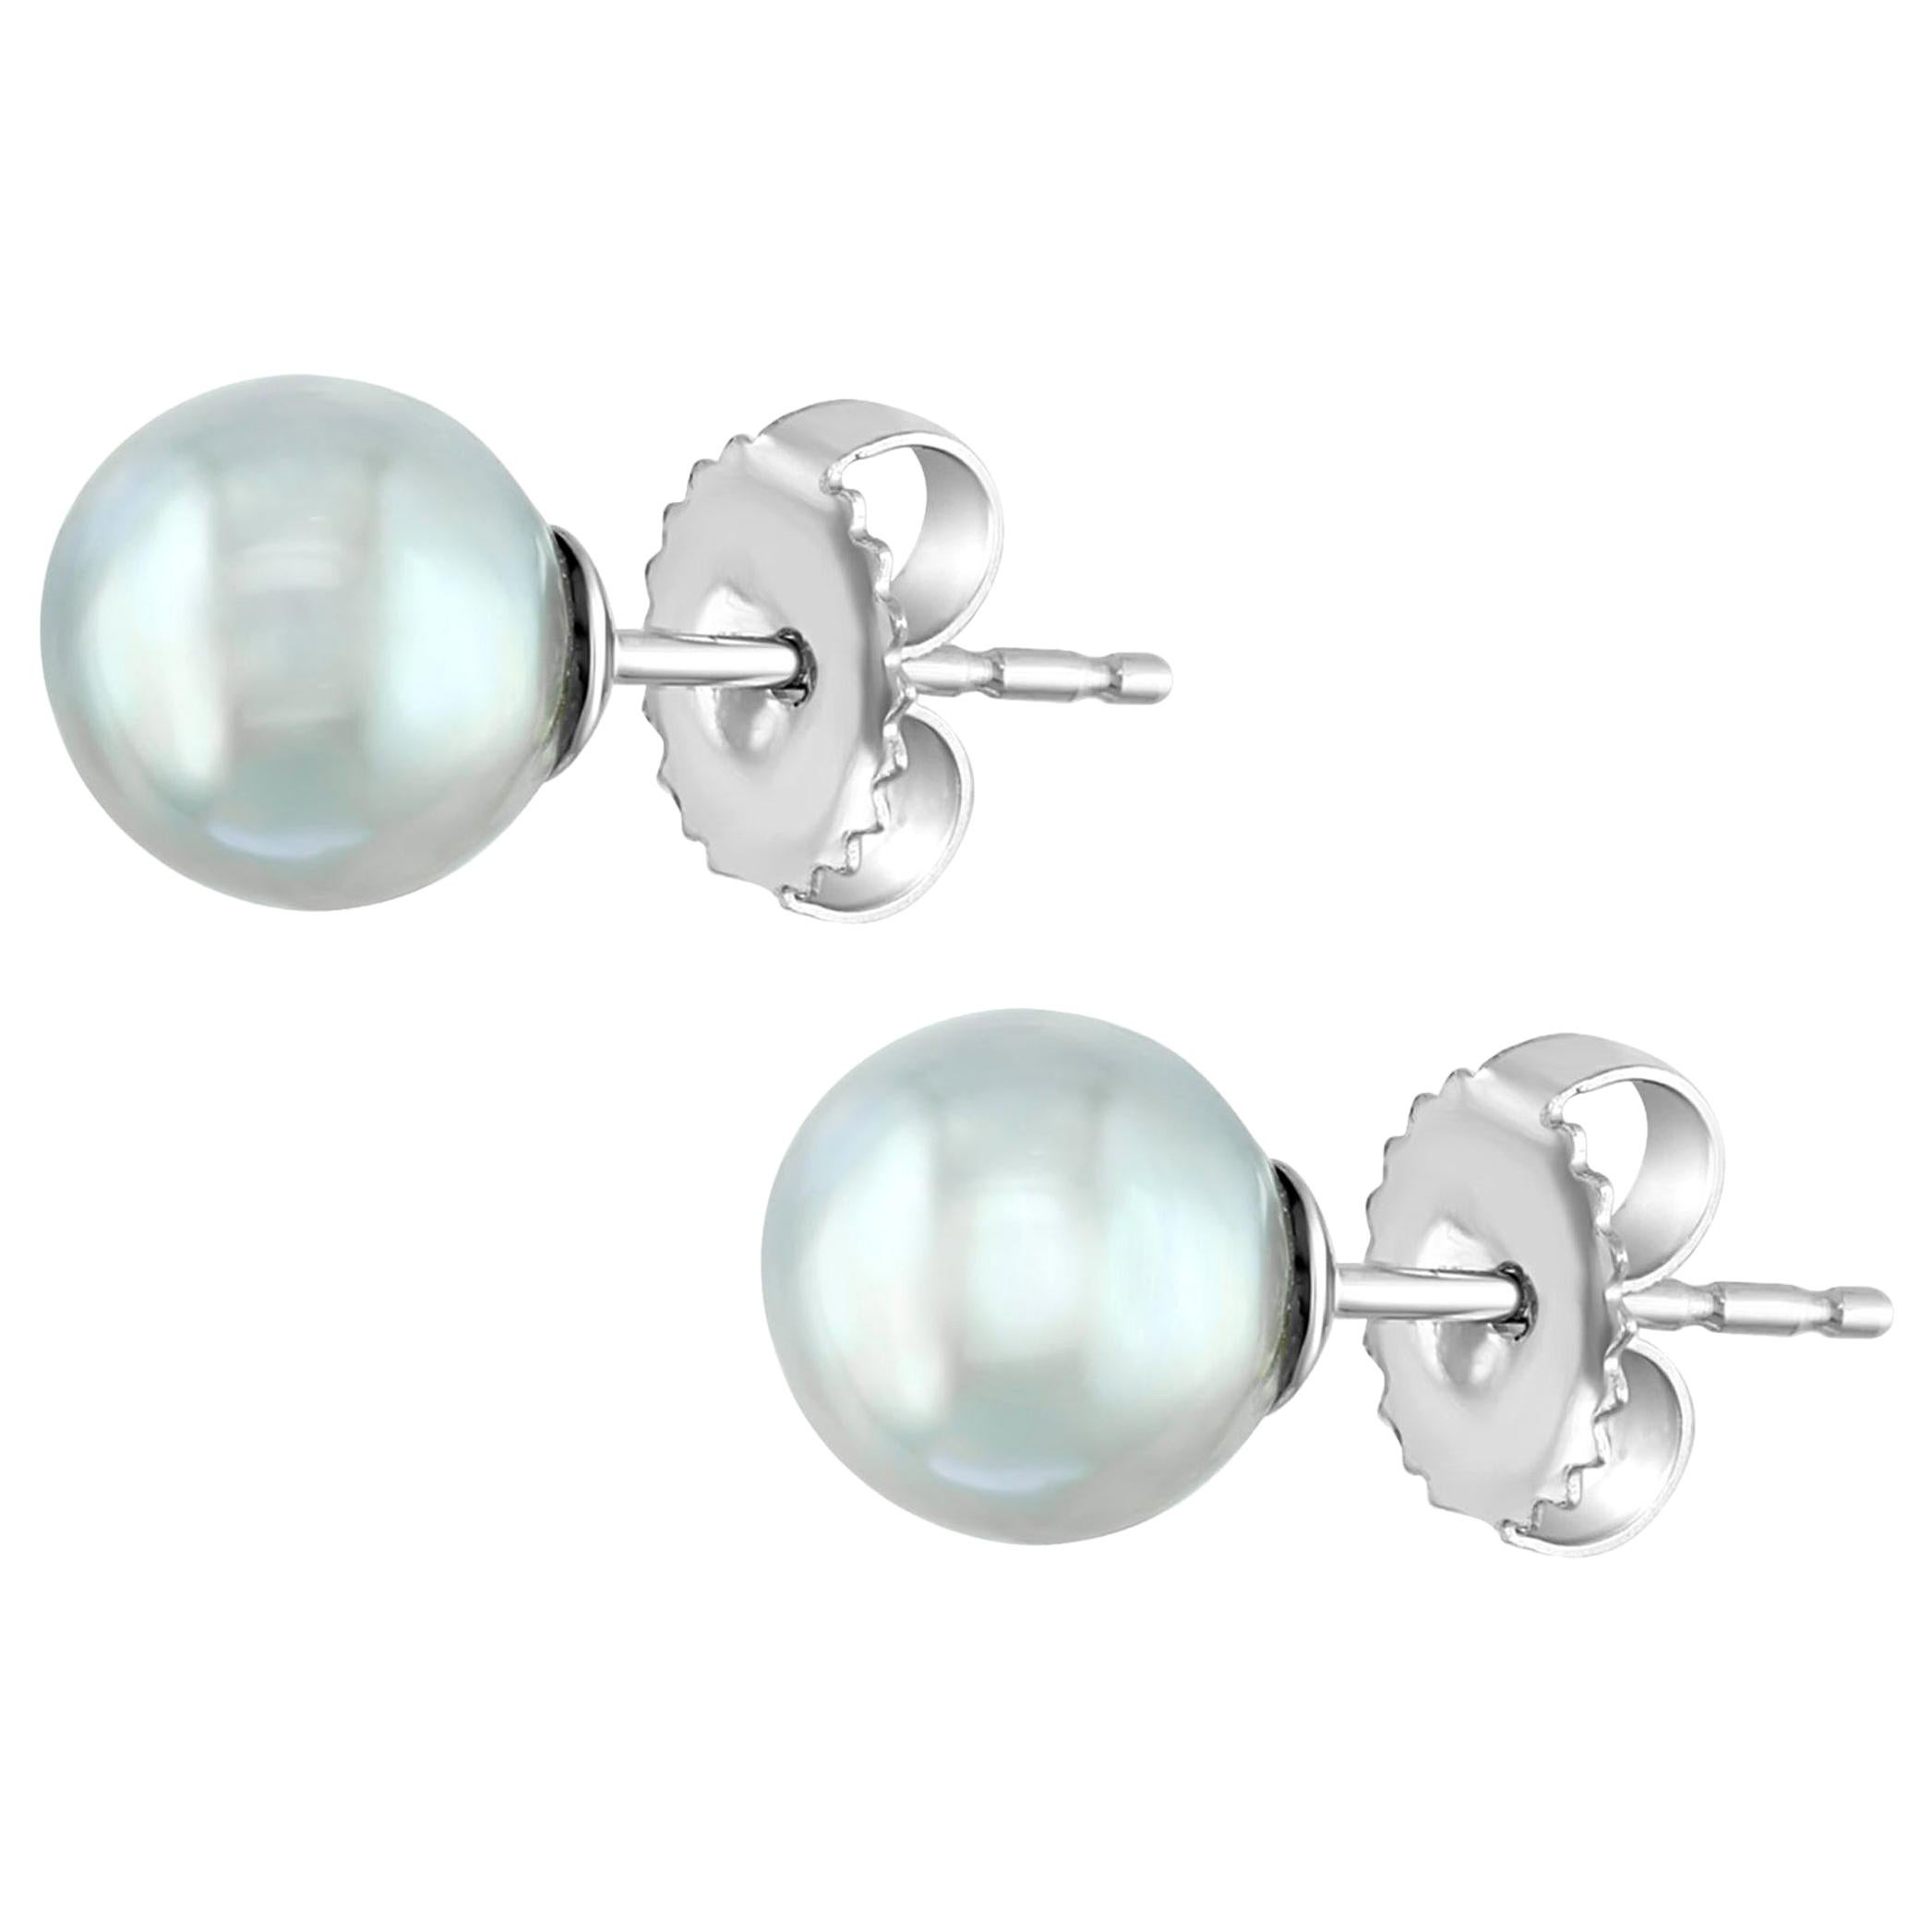 These stud earrings feature Vietnamese Blue Akoya pearls in a natural blue color. The pearls measure 7-8mm and are set on 14 karat white gold. Classic yet very unique and rare, these are a must for any jewelry collection.
AN ELEGANT EXPRESSION –